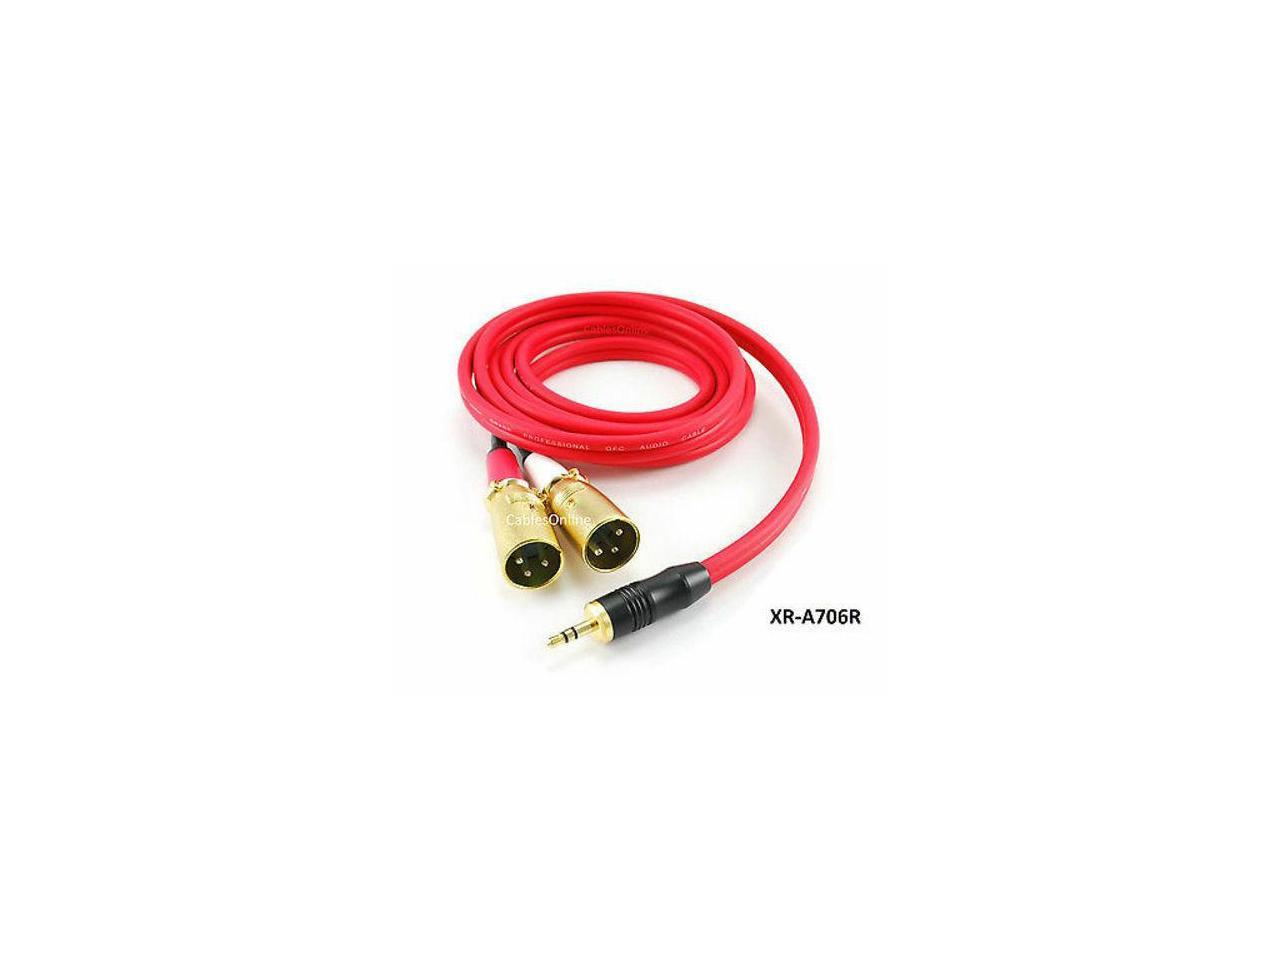 Citroen C1 C2 C3 3.5mm RCA Aux In Adaptor Lead Kit for MP3 iPod iPhone Devices 